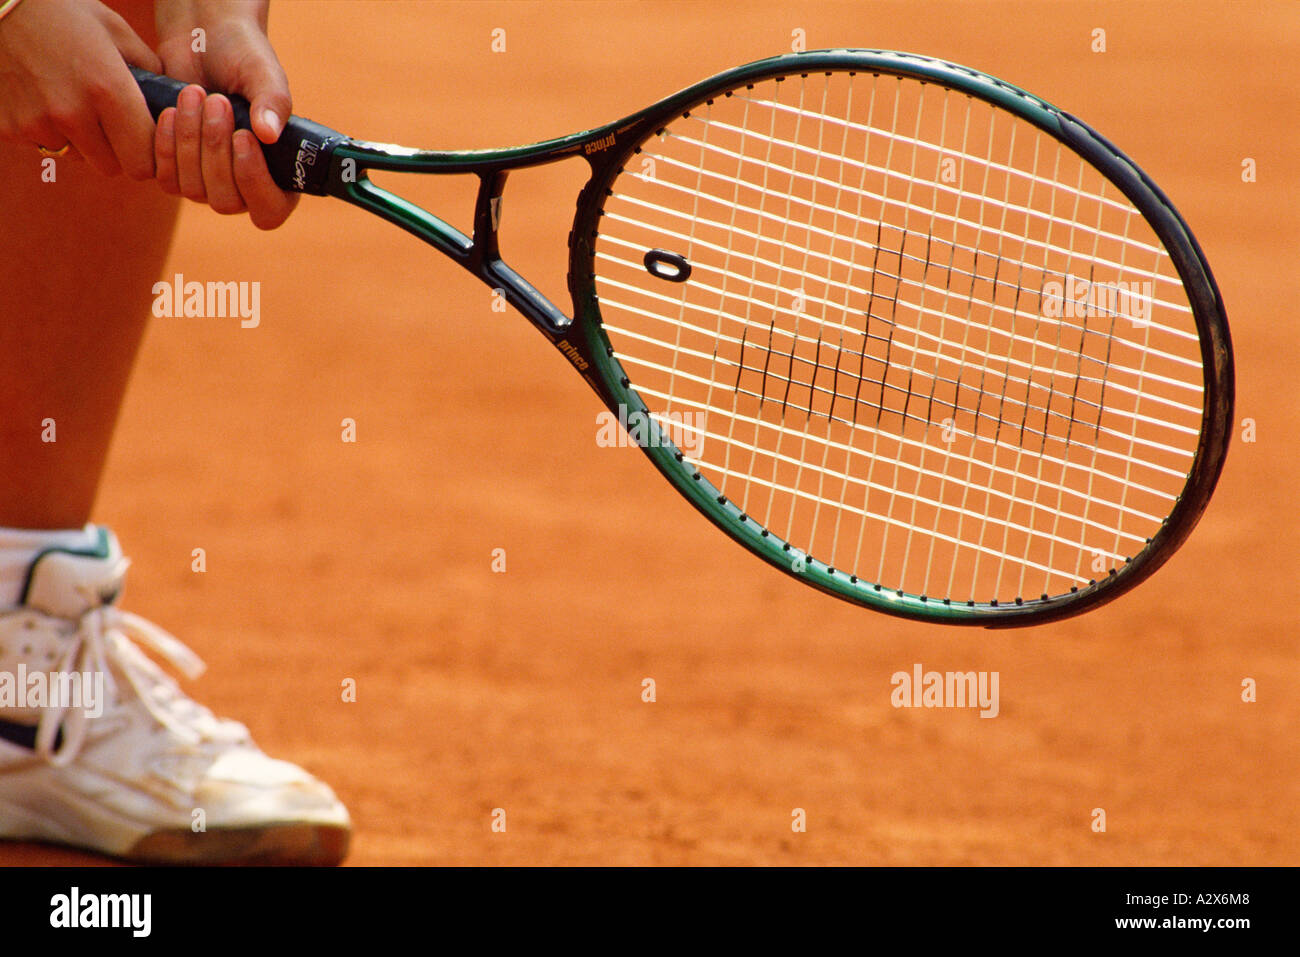 Close-up of female tennis player's foot and racket on hard court. Stock Photo